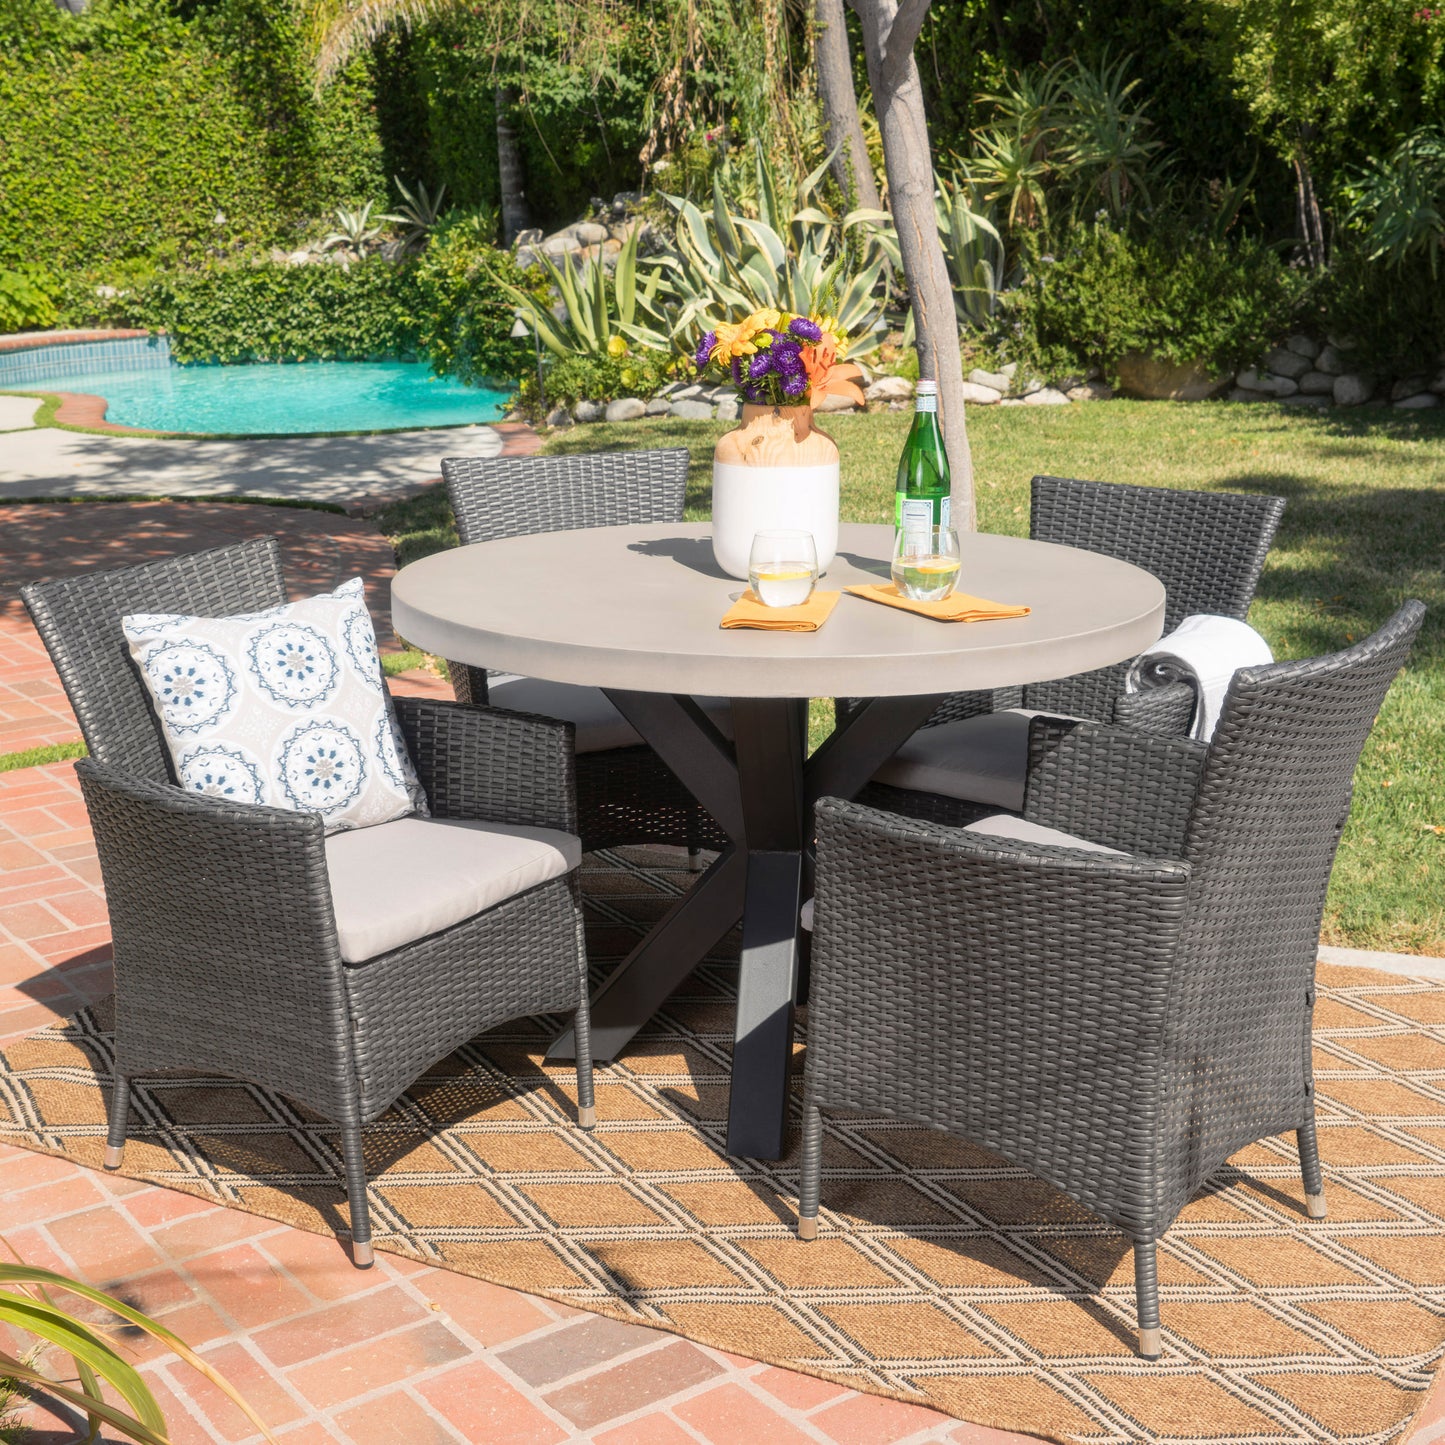 Sansai Outdoor Transitional 5 Piece Wicker Dining Set with Lightweight Concrete Table